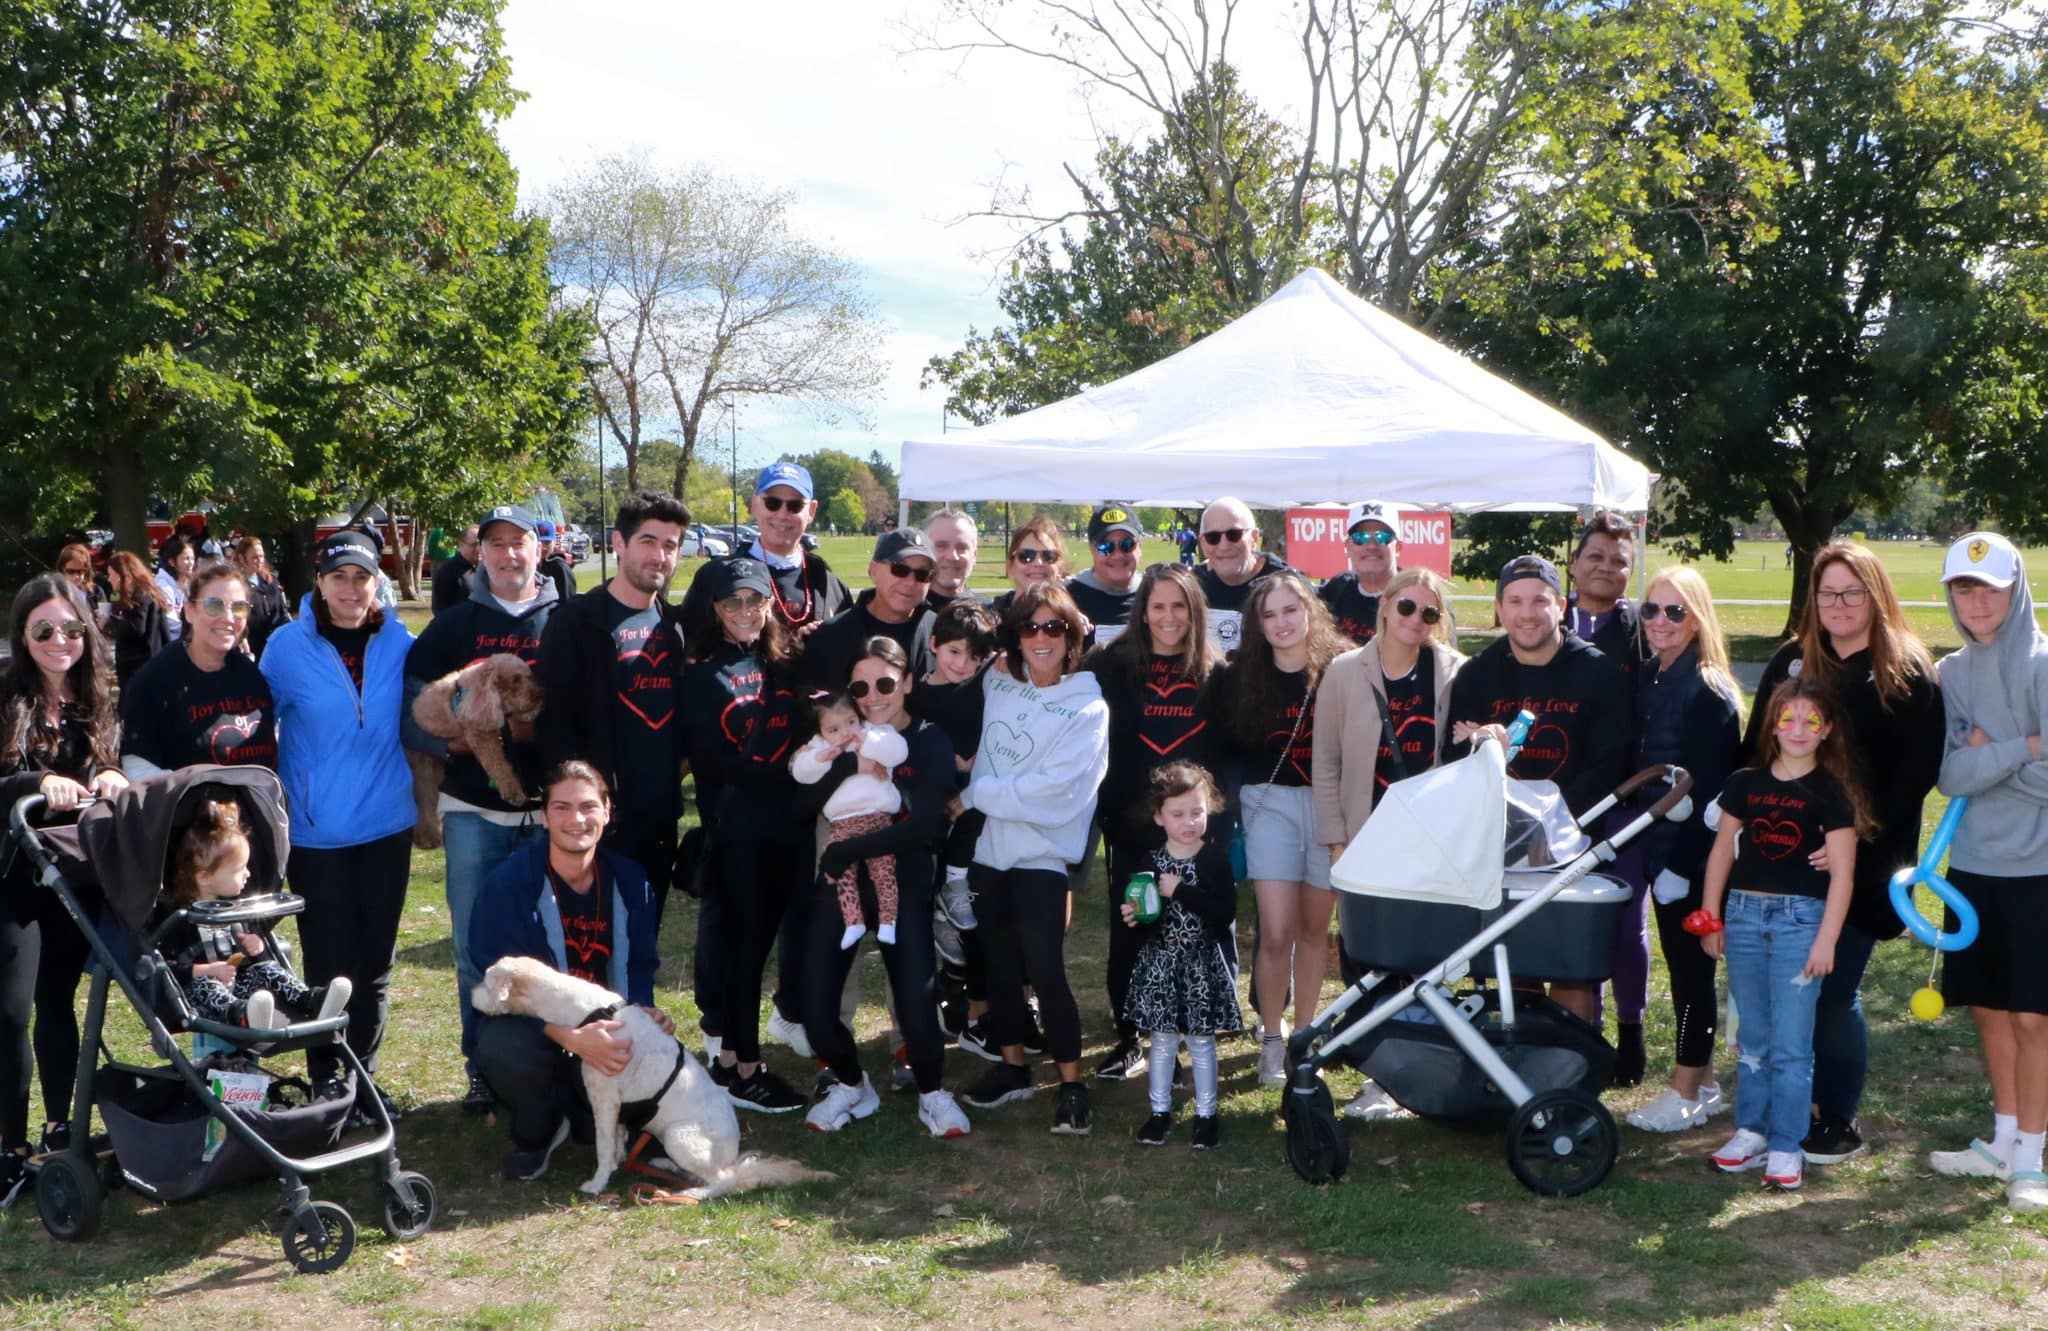 Walk to Defeat ALS Long Island Team posing for picture in park